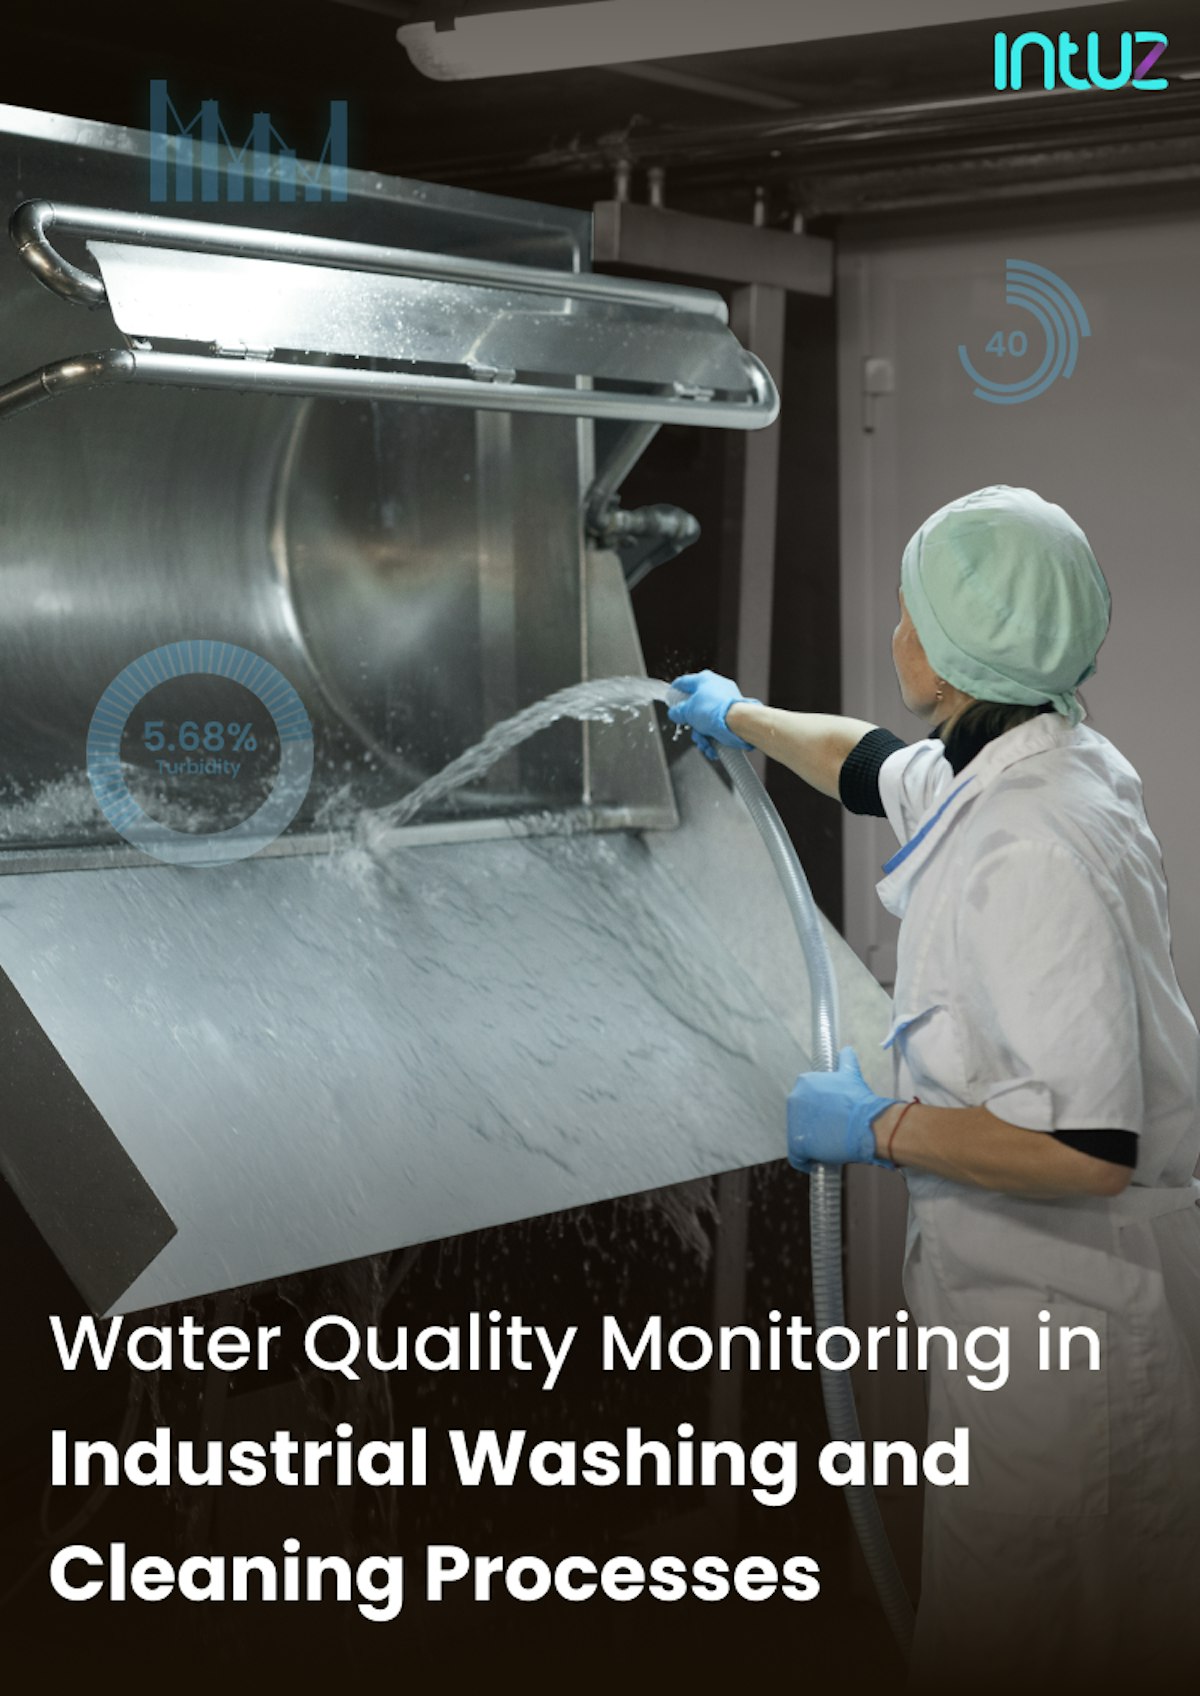 Water Quality monitoring